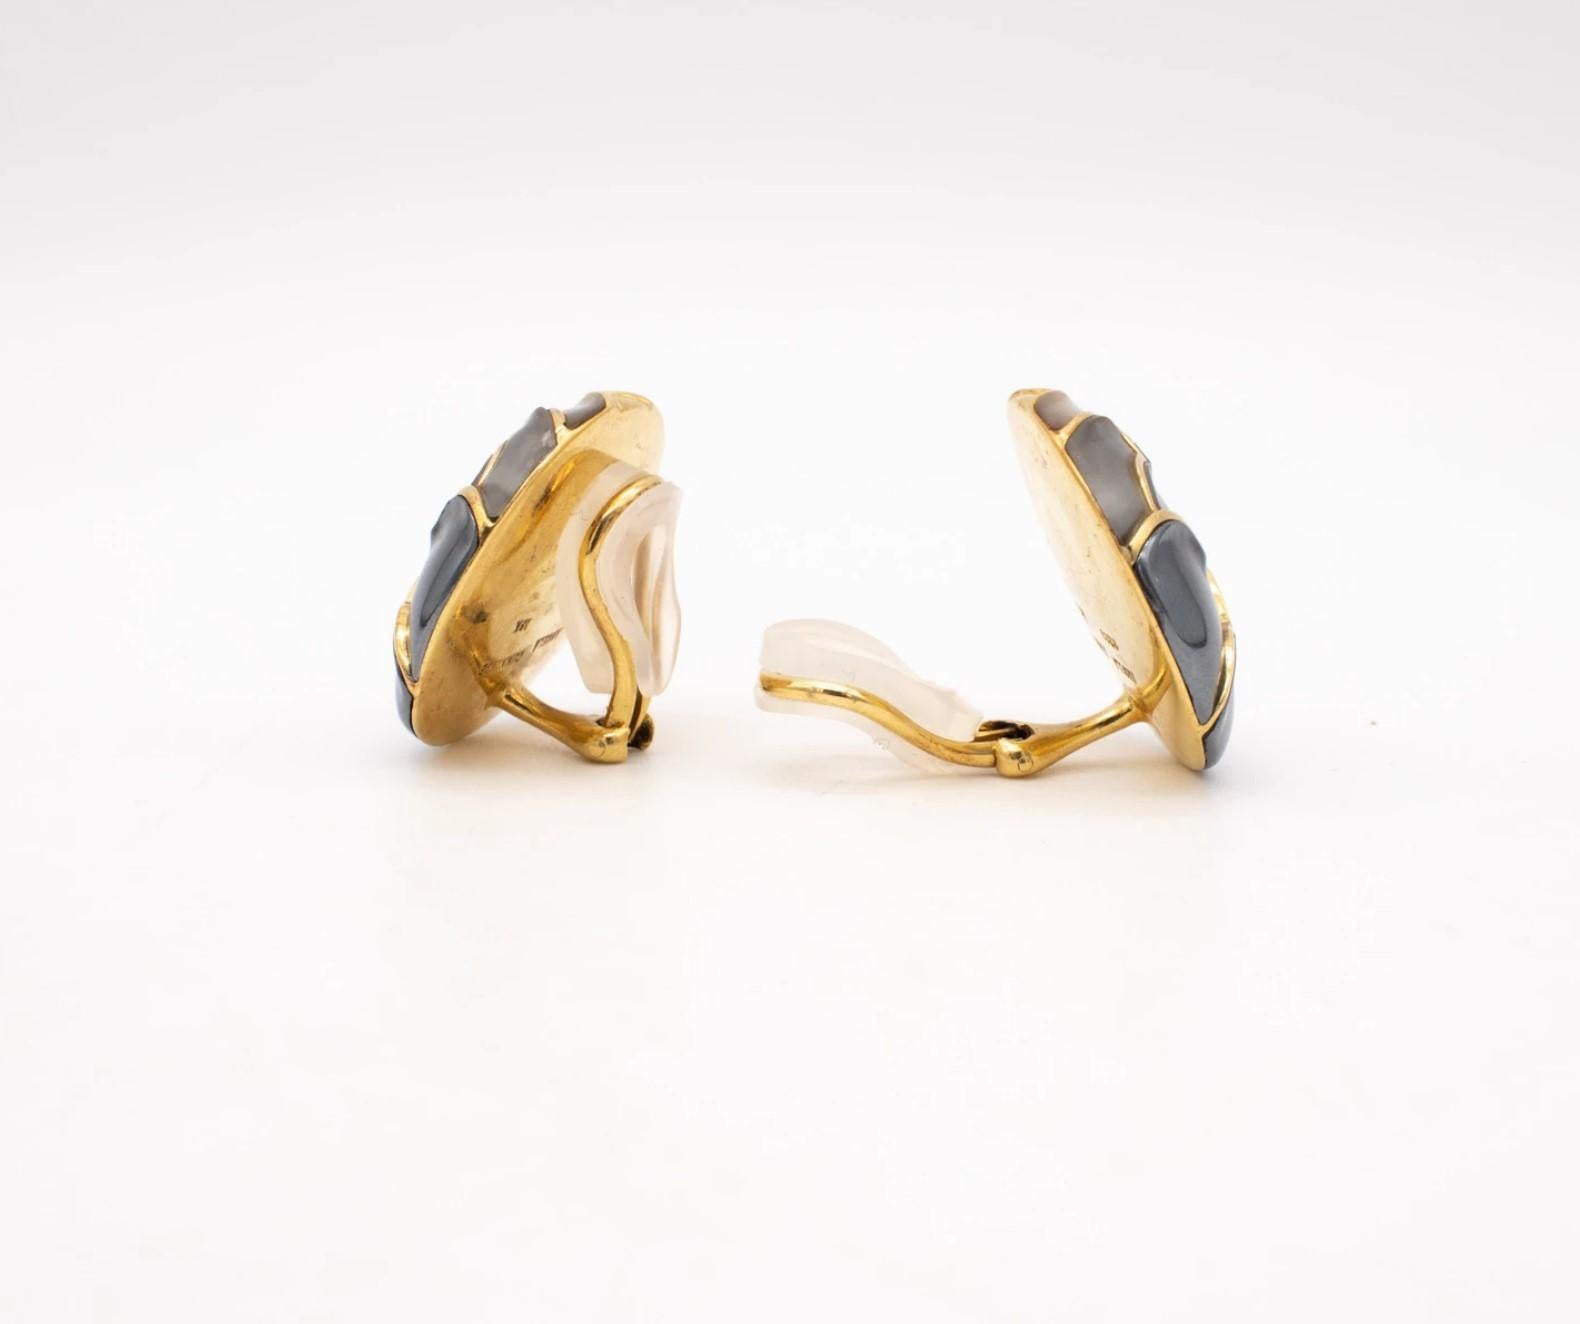 Modernist Angela Cummings Japonisme Ear-Clips in 18Kt Yellow Gold with Inlaid Gemstones